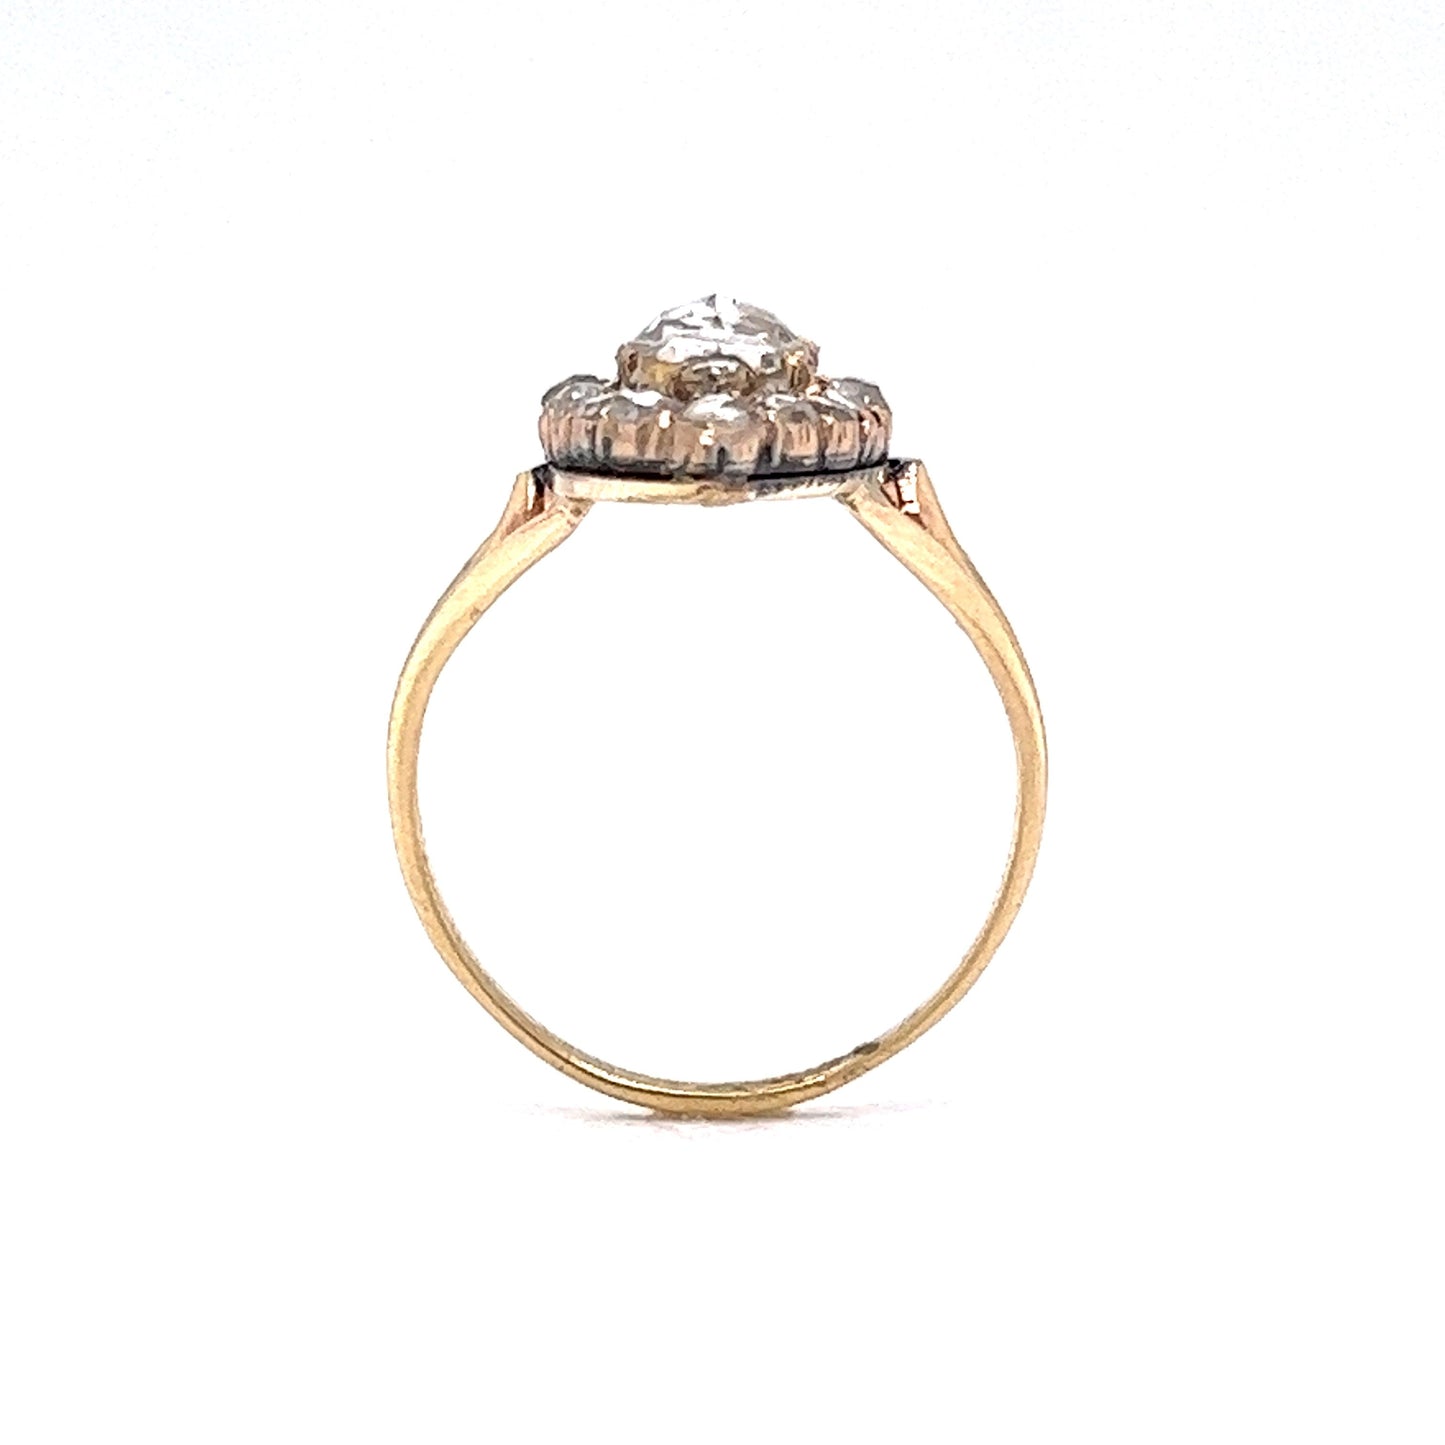 1.10 Victorian Navette Diamond Ring in 10k Yellow Gold